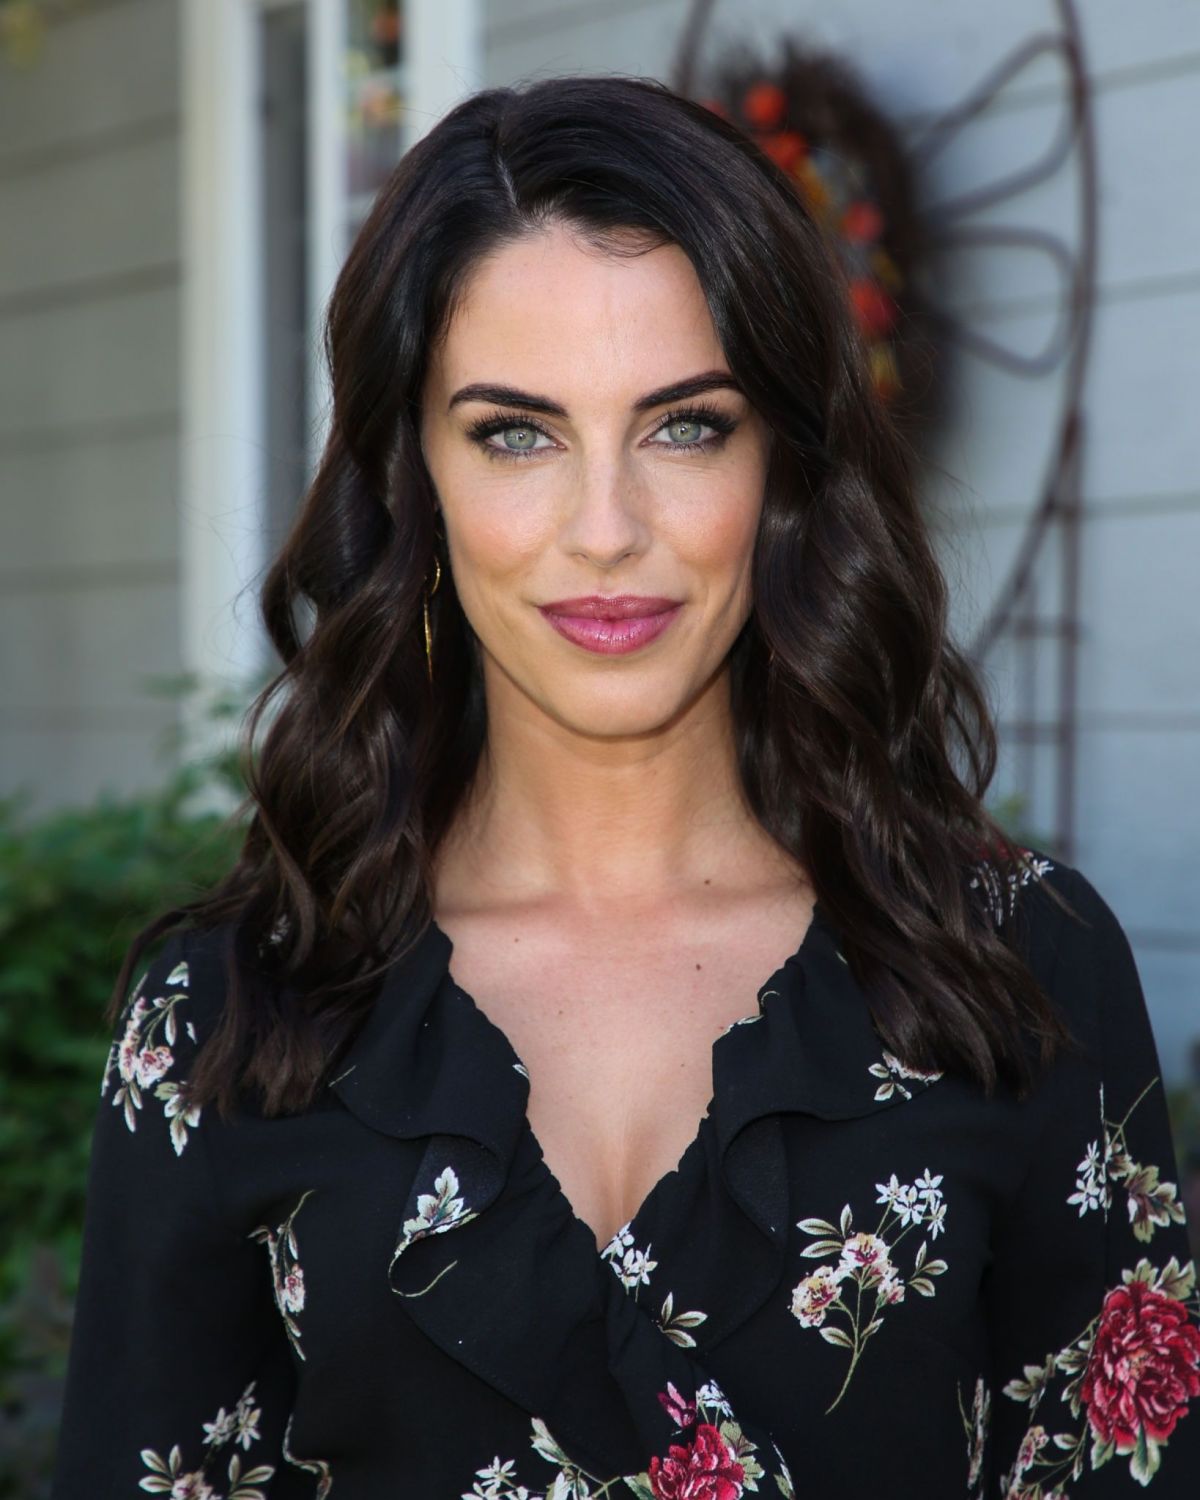 30 Jessica Lowndes Pictures Richi Gallery Collection with 668 high quality pics. 30 jessica lowndes pictures richi